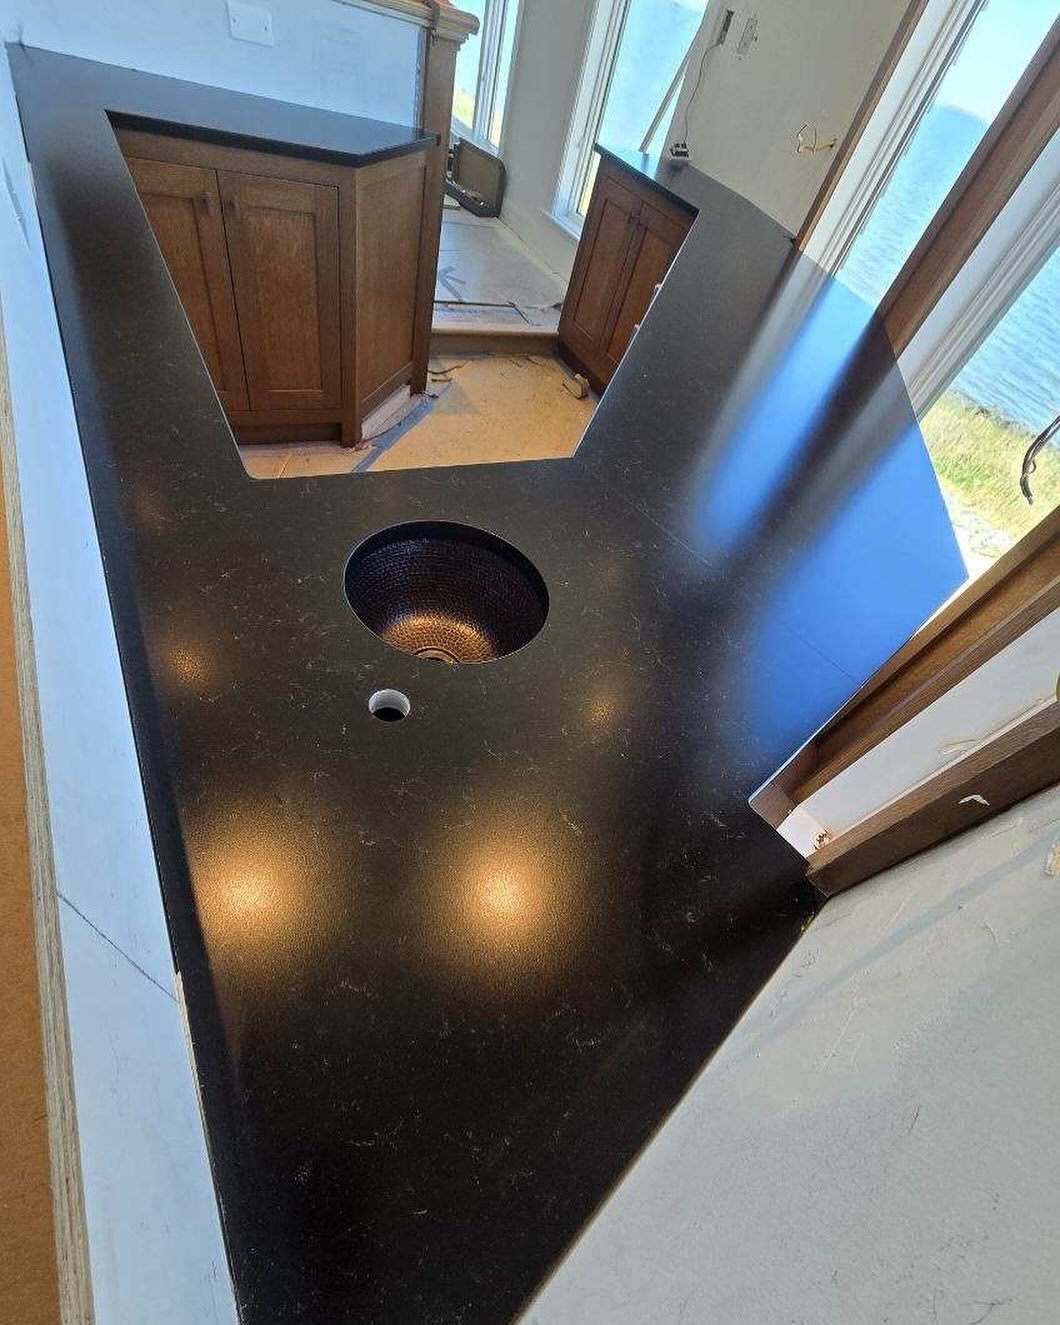 Bet you&rsquo;ve never seen a countertop quite like this before! (We haven&rsquo;t either) Great work from our guys!